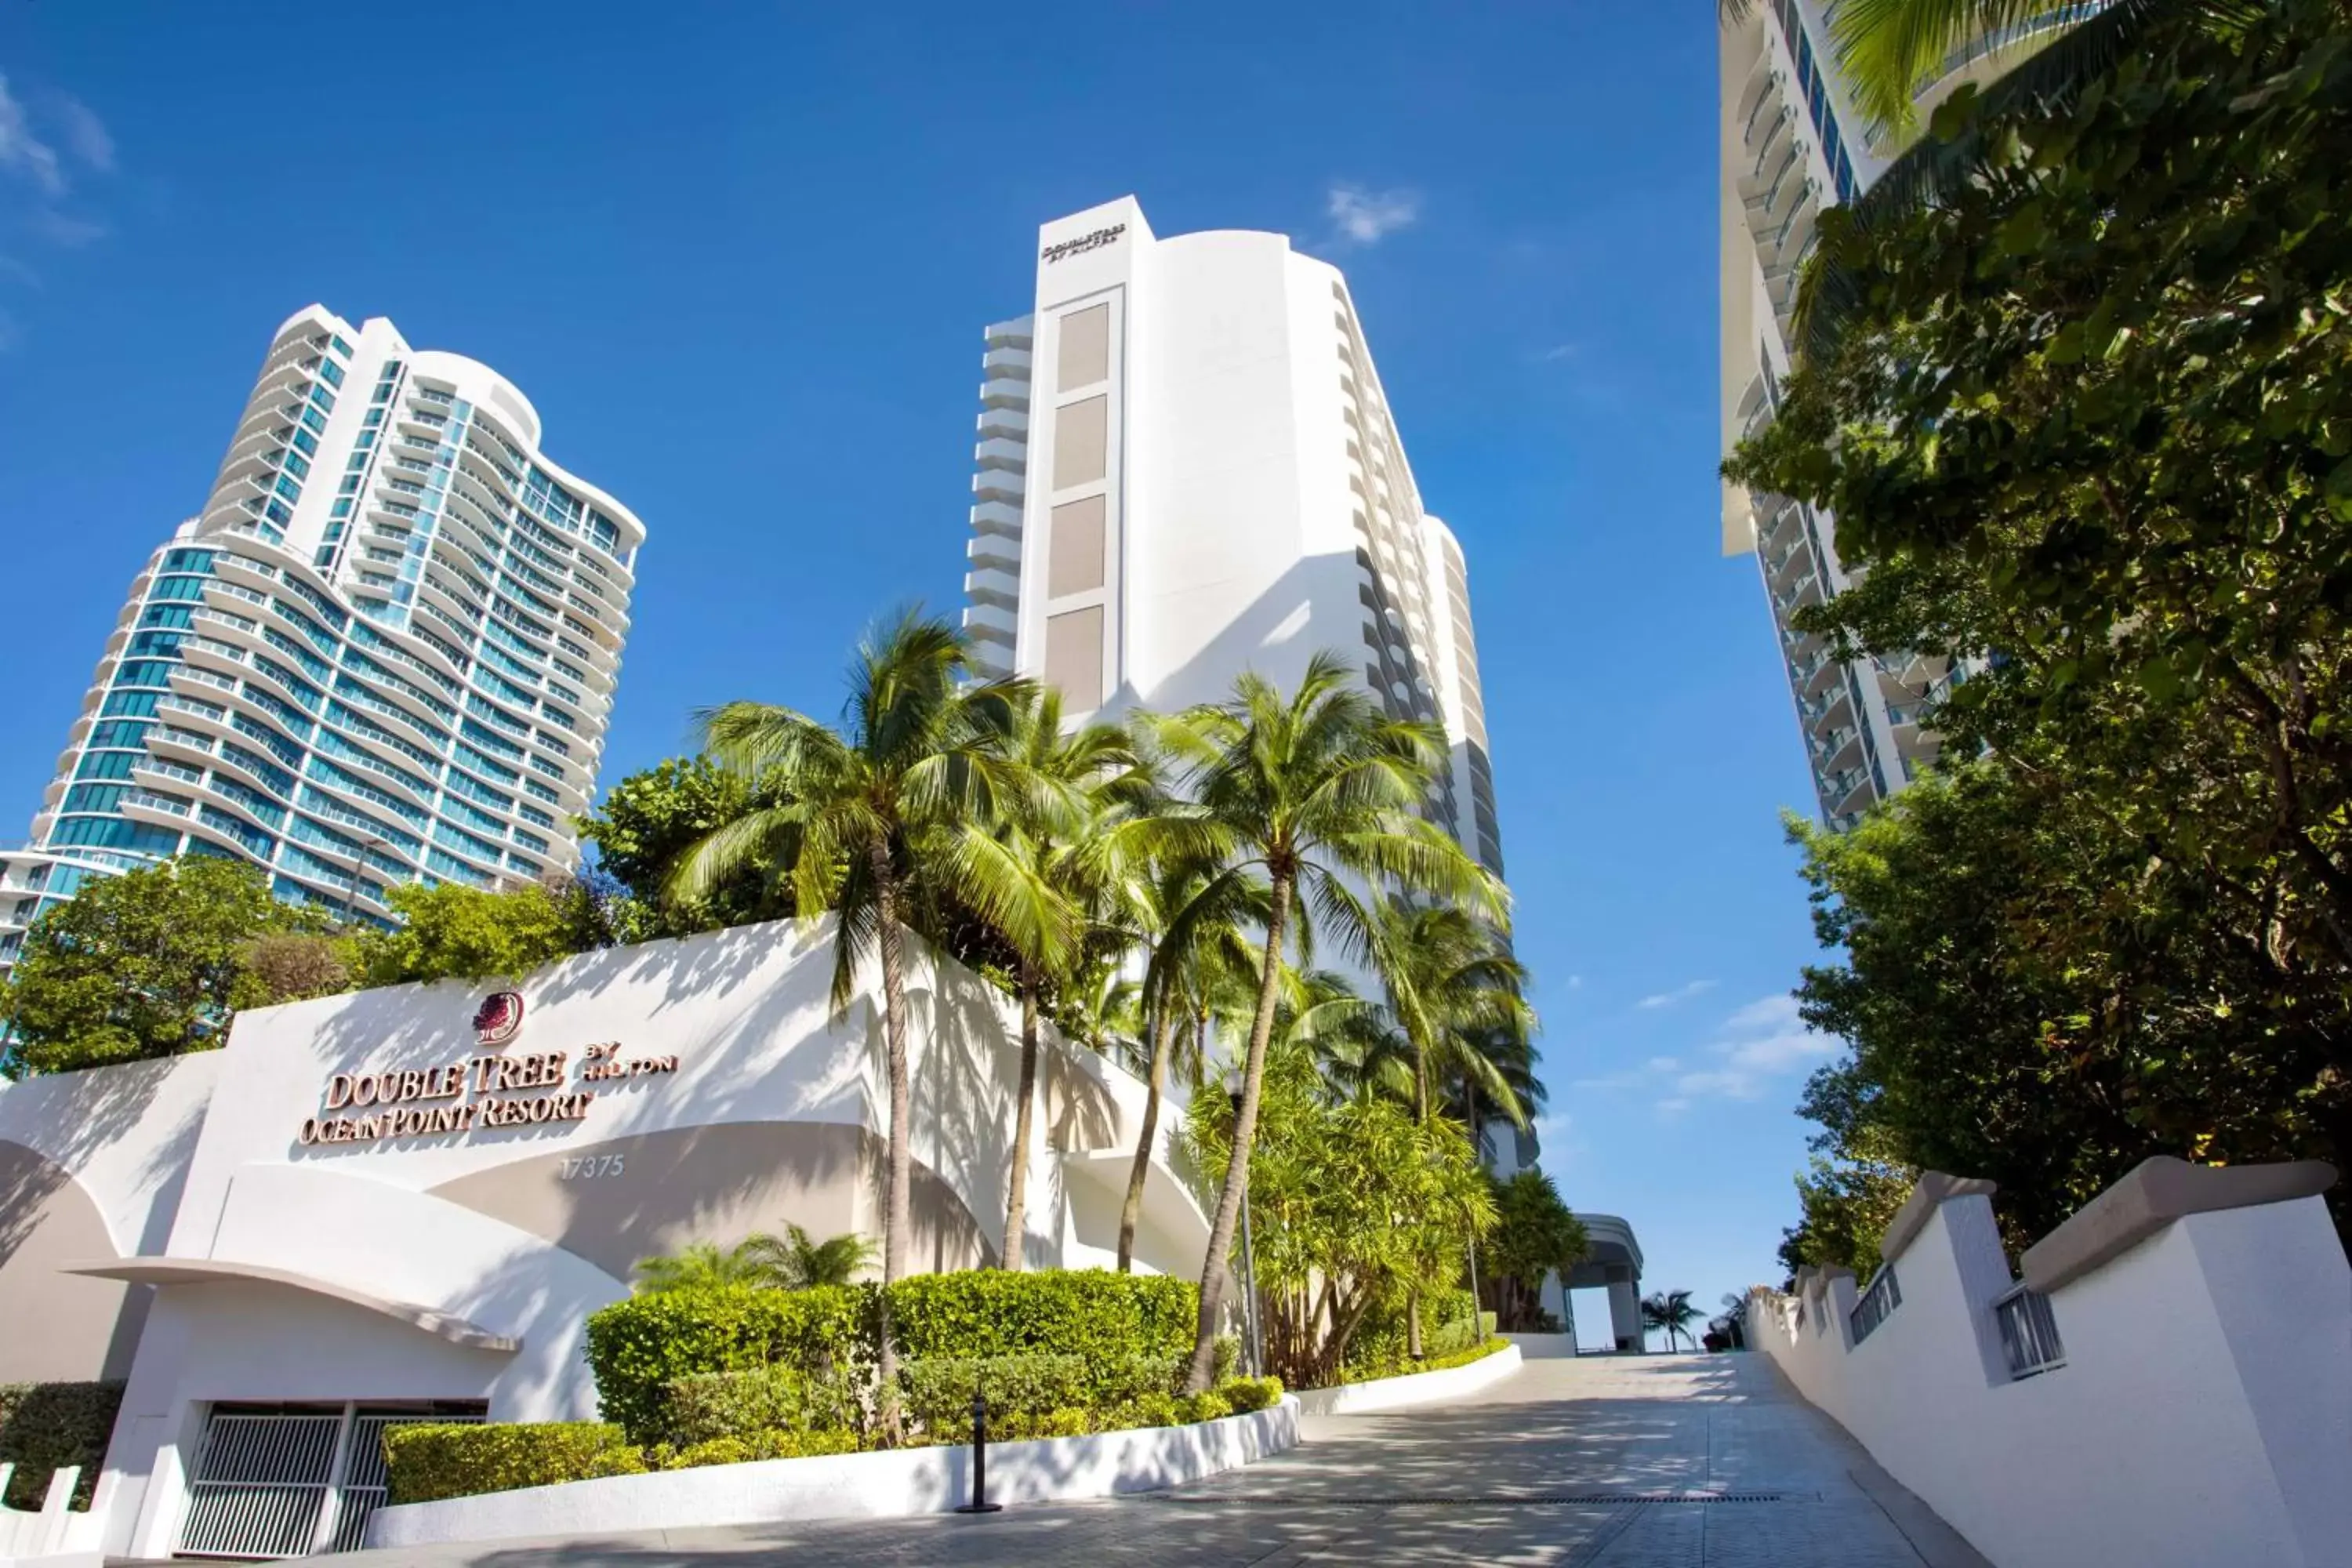 Property Building in DoubleTree by Hilton Ocean Point Resort - North Miami Beach